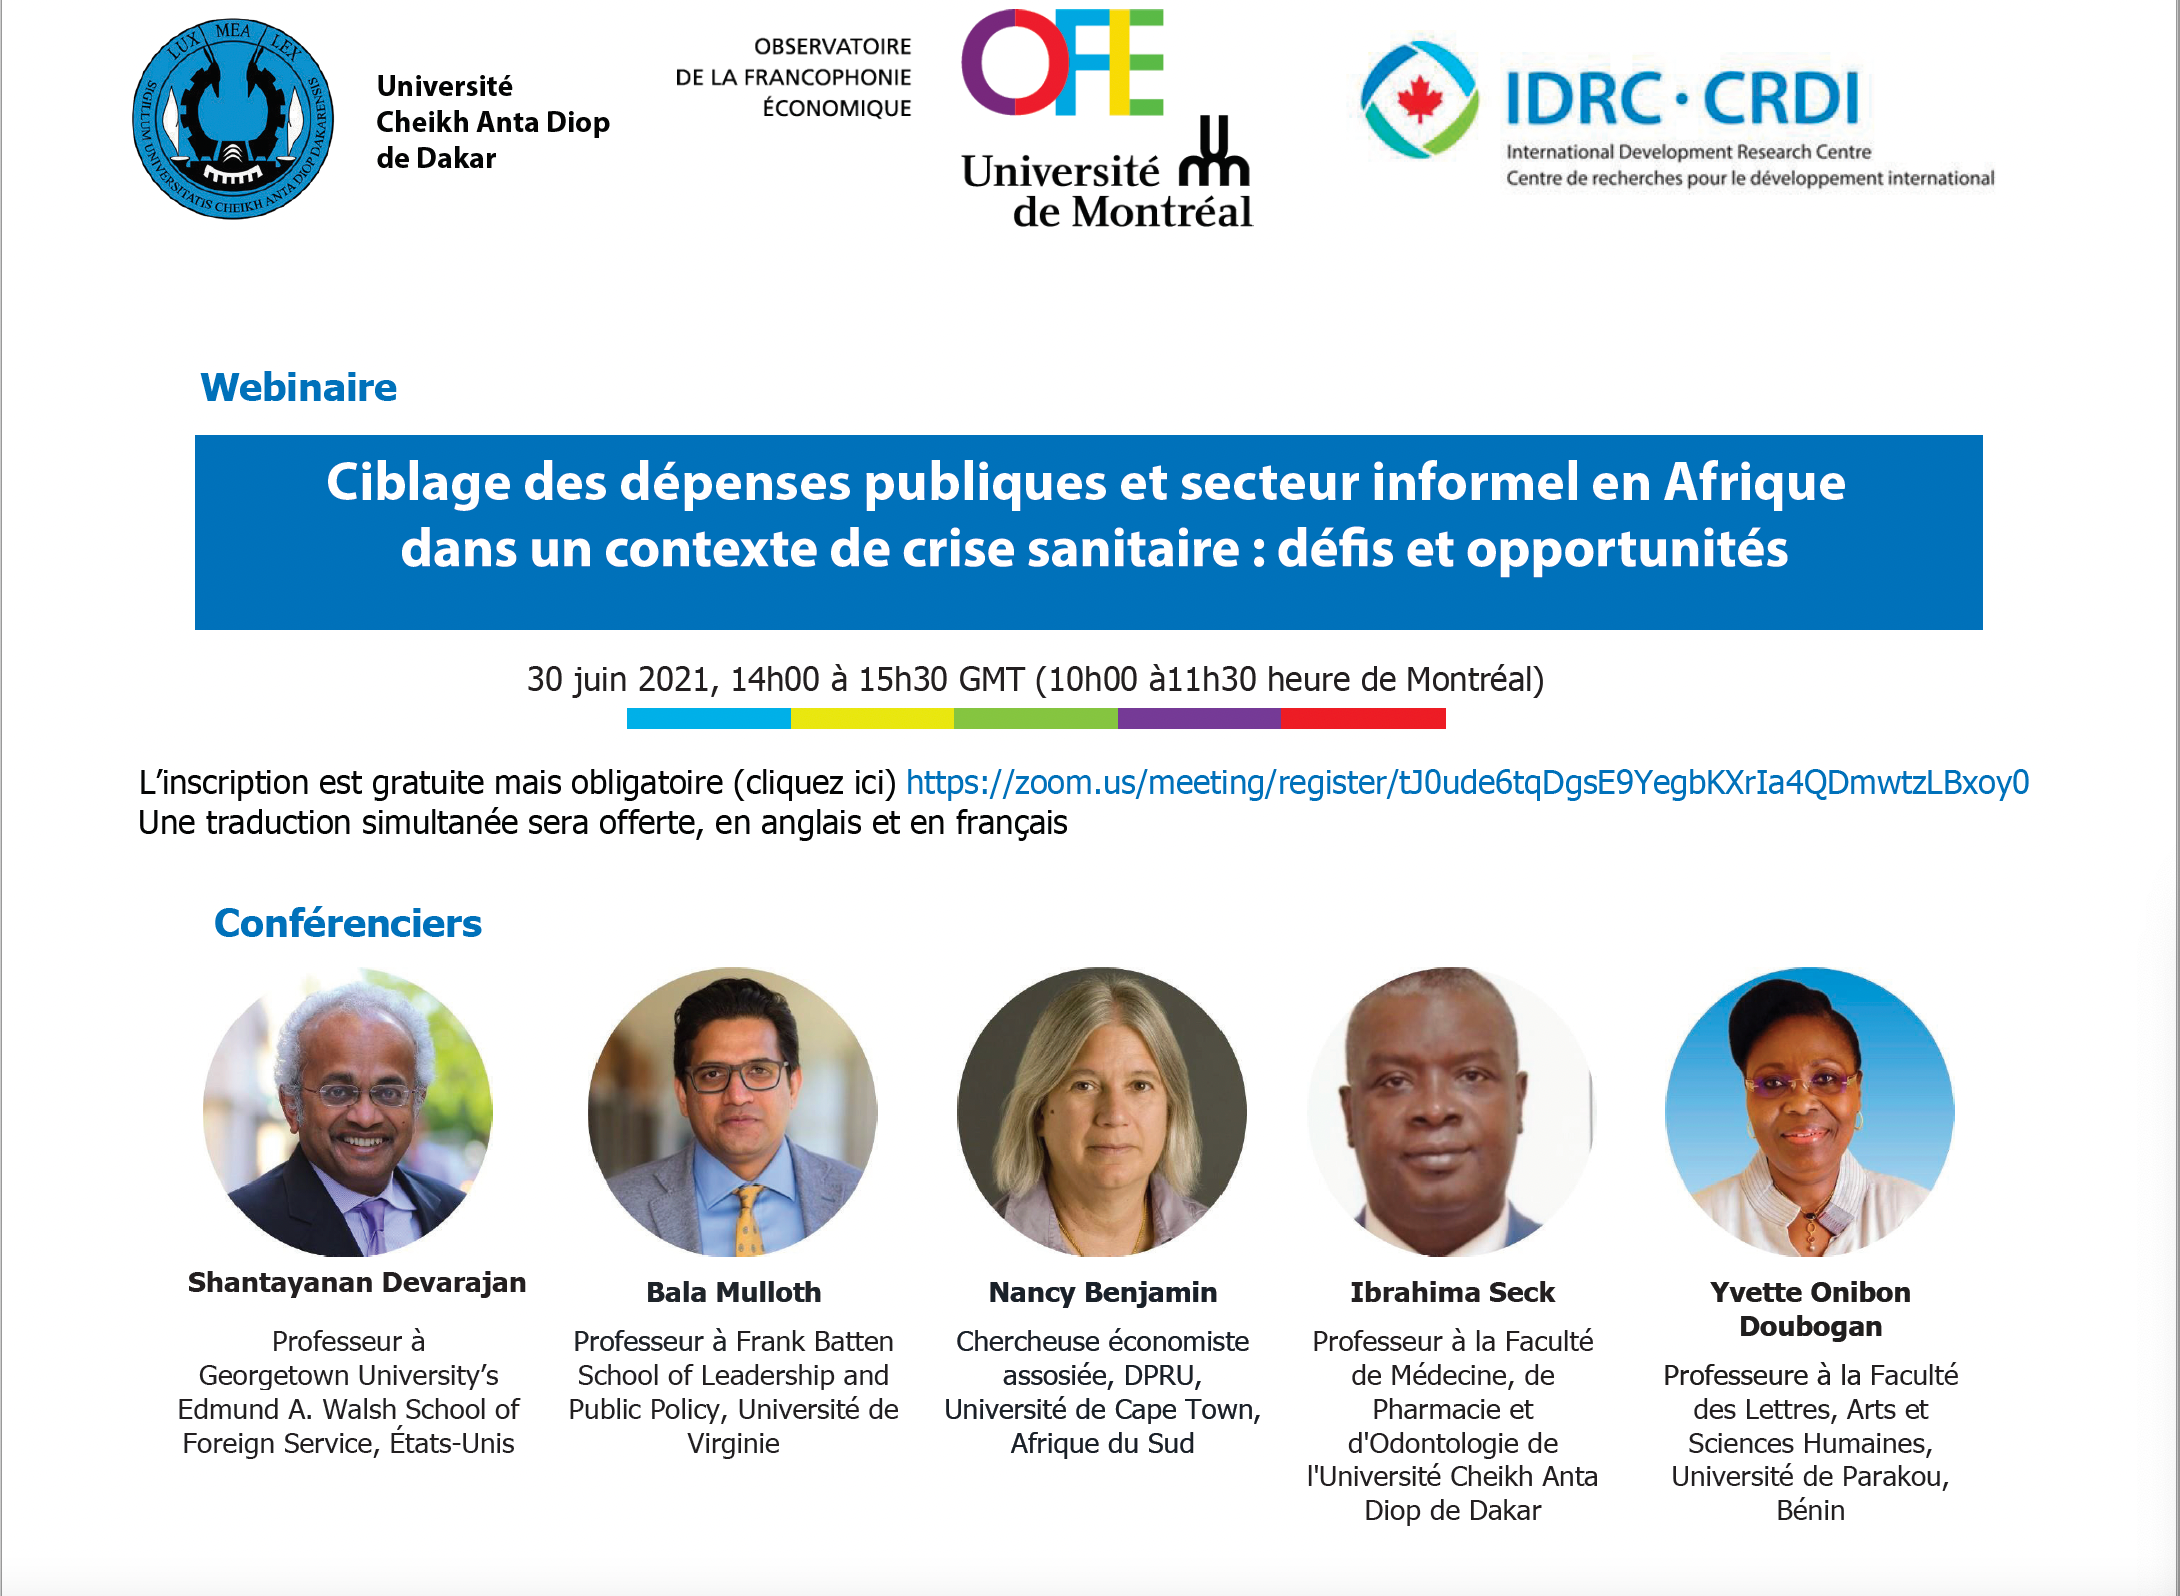 Strengthening public policies for decent work in Francophone Africa in the context of the COVID-19 pandemic